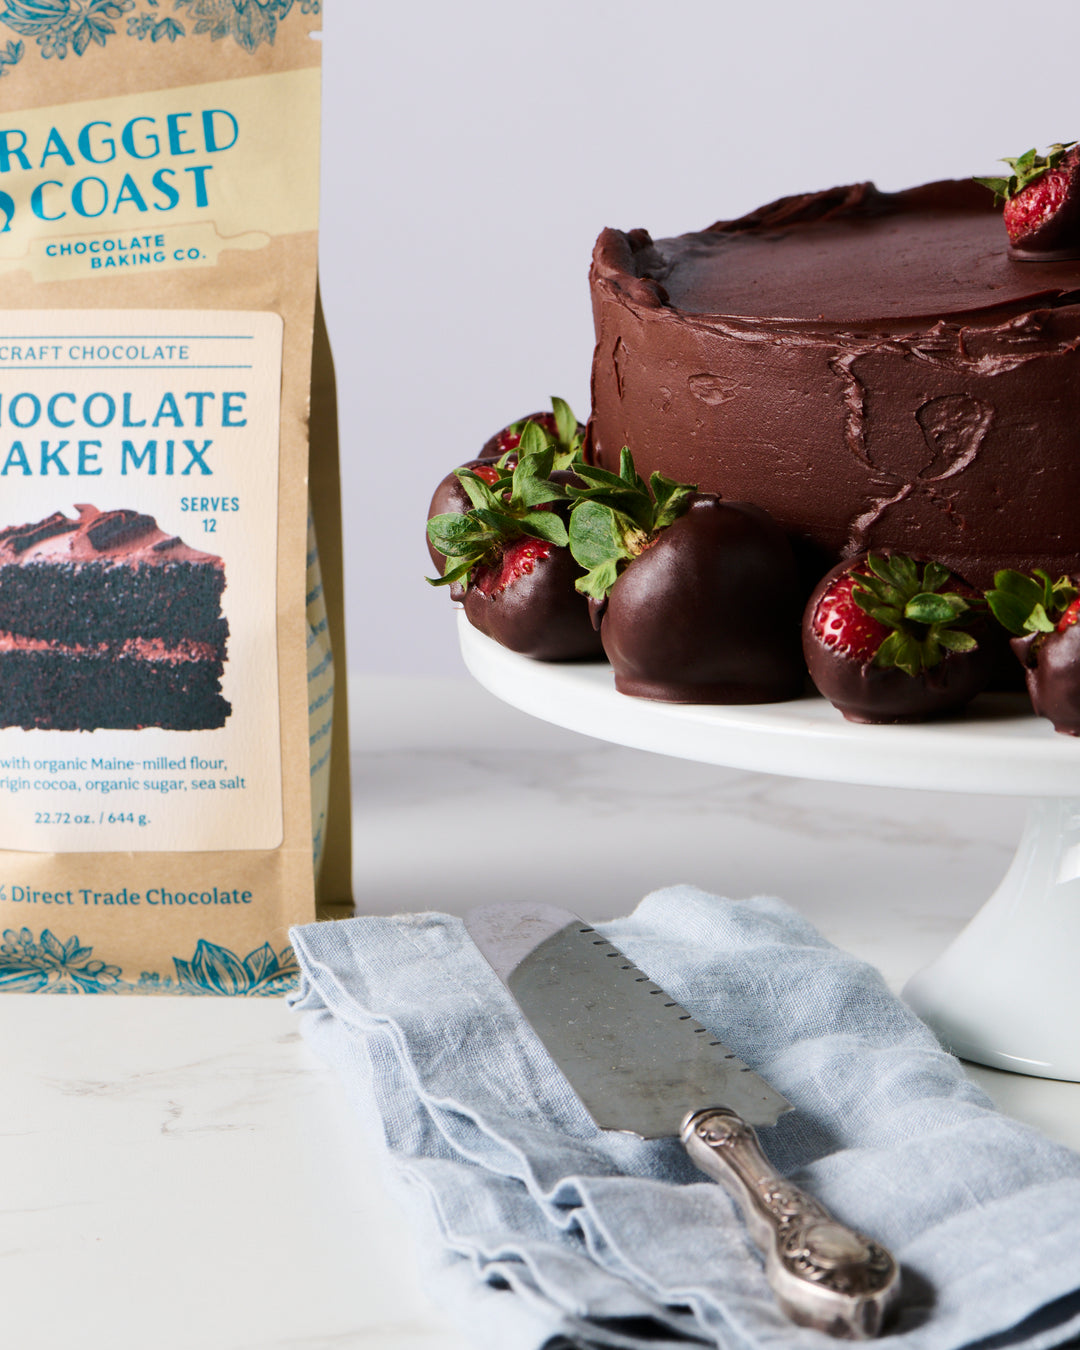 A chocolate cake topped with strawberries next to a Ragged Coast Chocolates Baking Mix Gift Box and a cake server on a cloth.